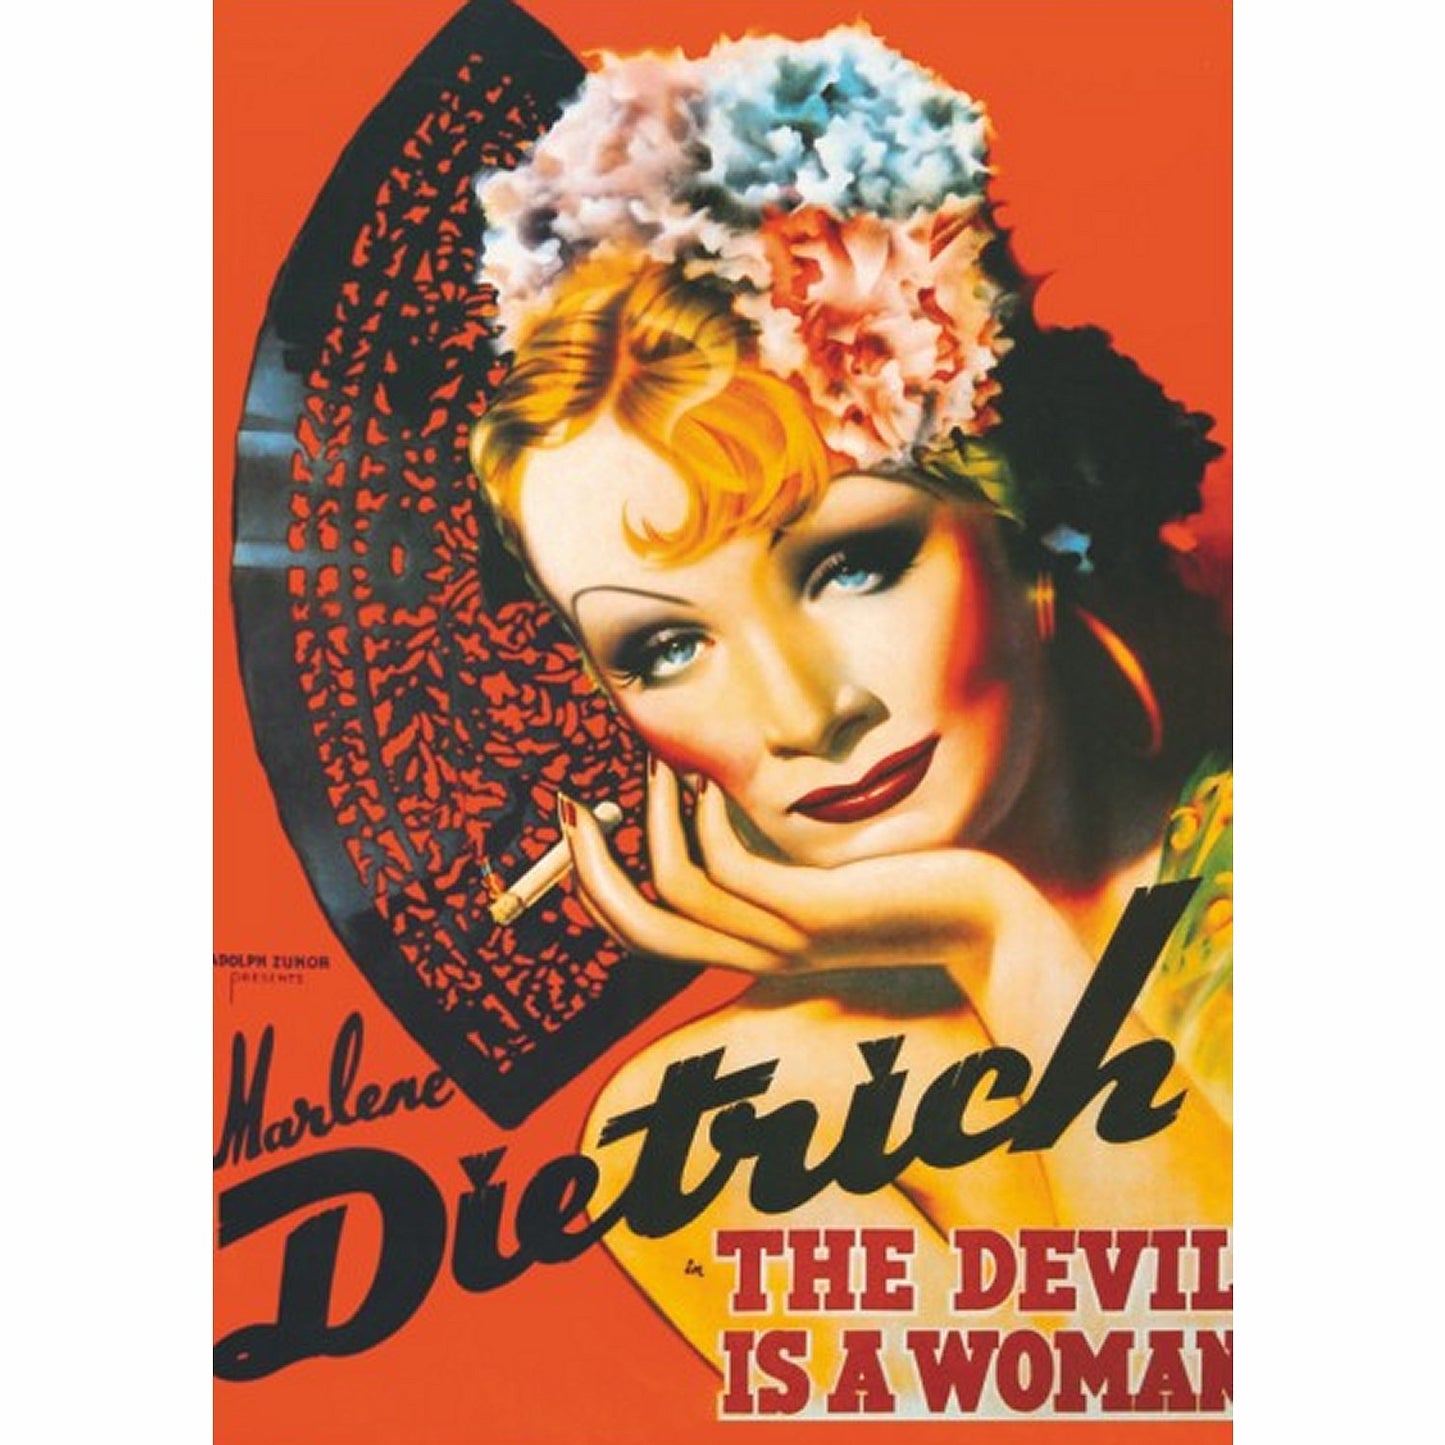 Dtoys - Marlene Dietrich : The Devil is a Woman - 1000 Piece Jigsaw Puzzle